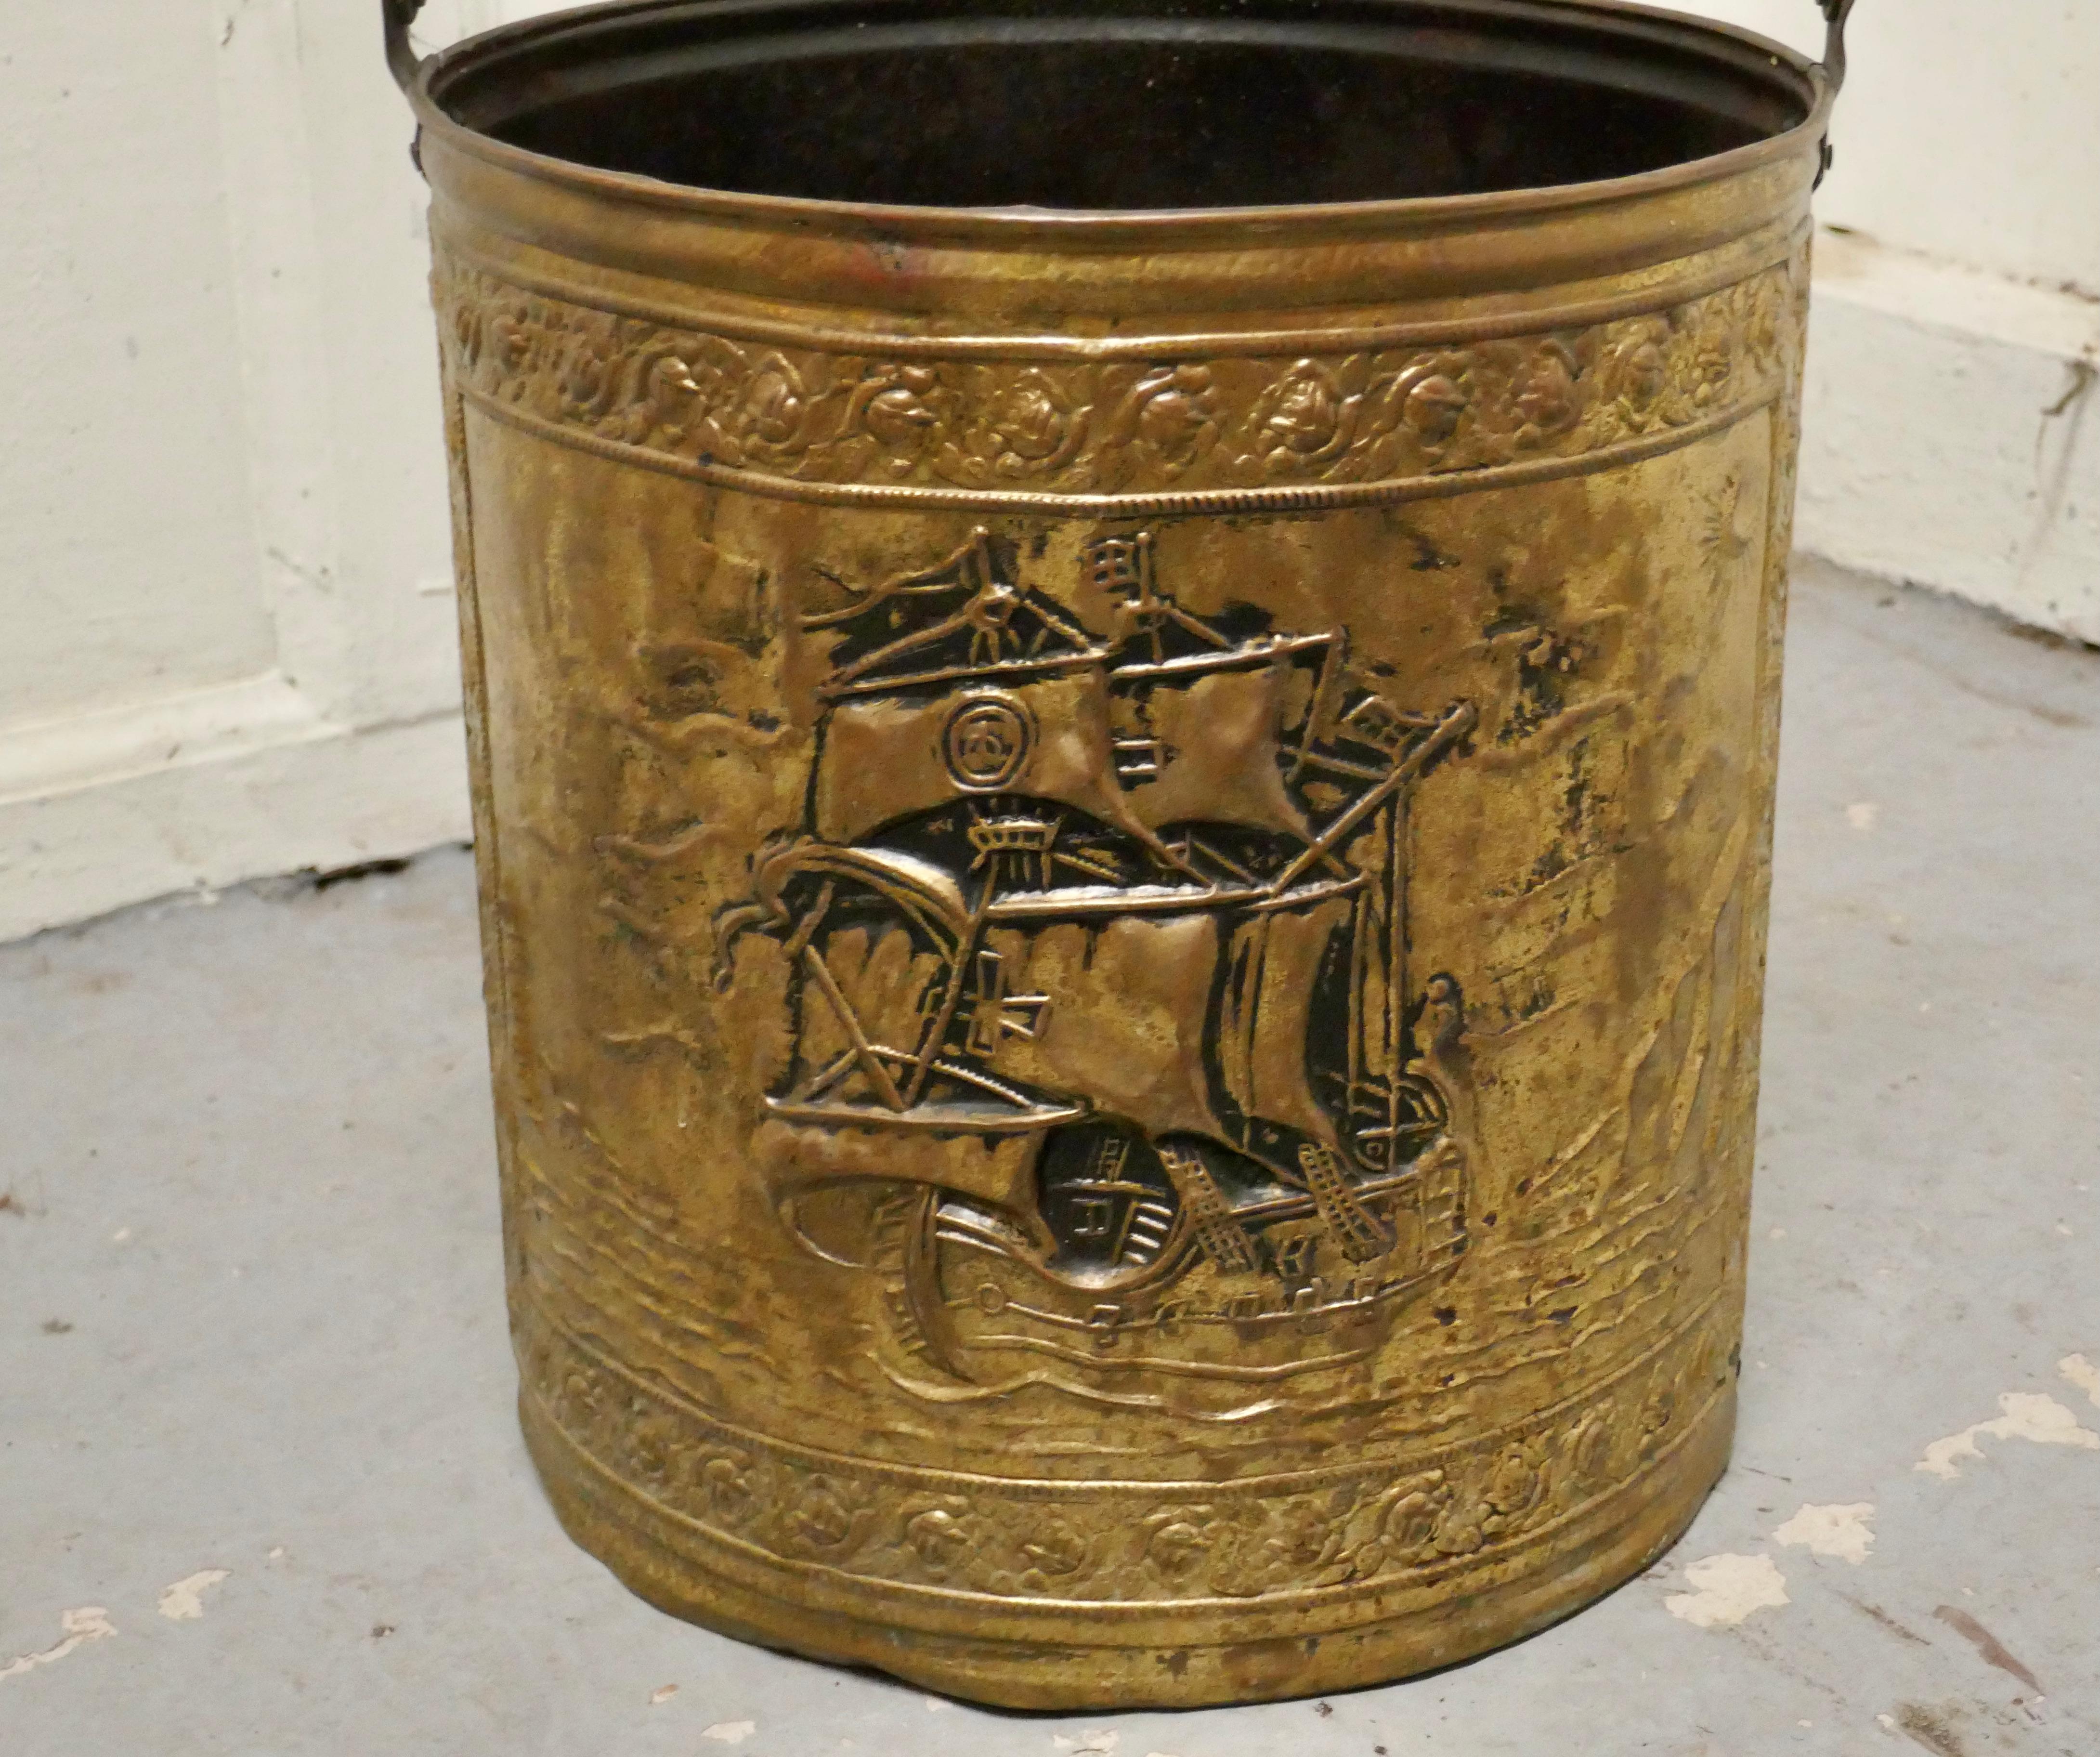 Embossed Brass coal bucket with a tea clipper sea scene 

This bucket is an attractive round shape, it is made in pressed brass and has a swing handle

The bucket is in good used condition, and is ready to go to work and grace your fireside at